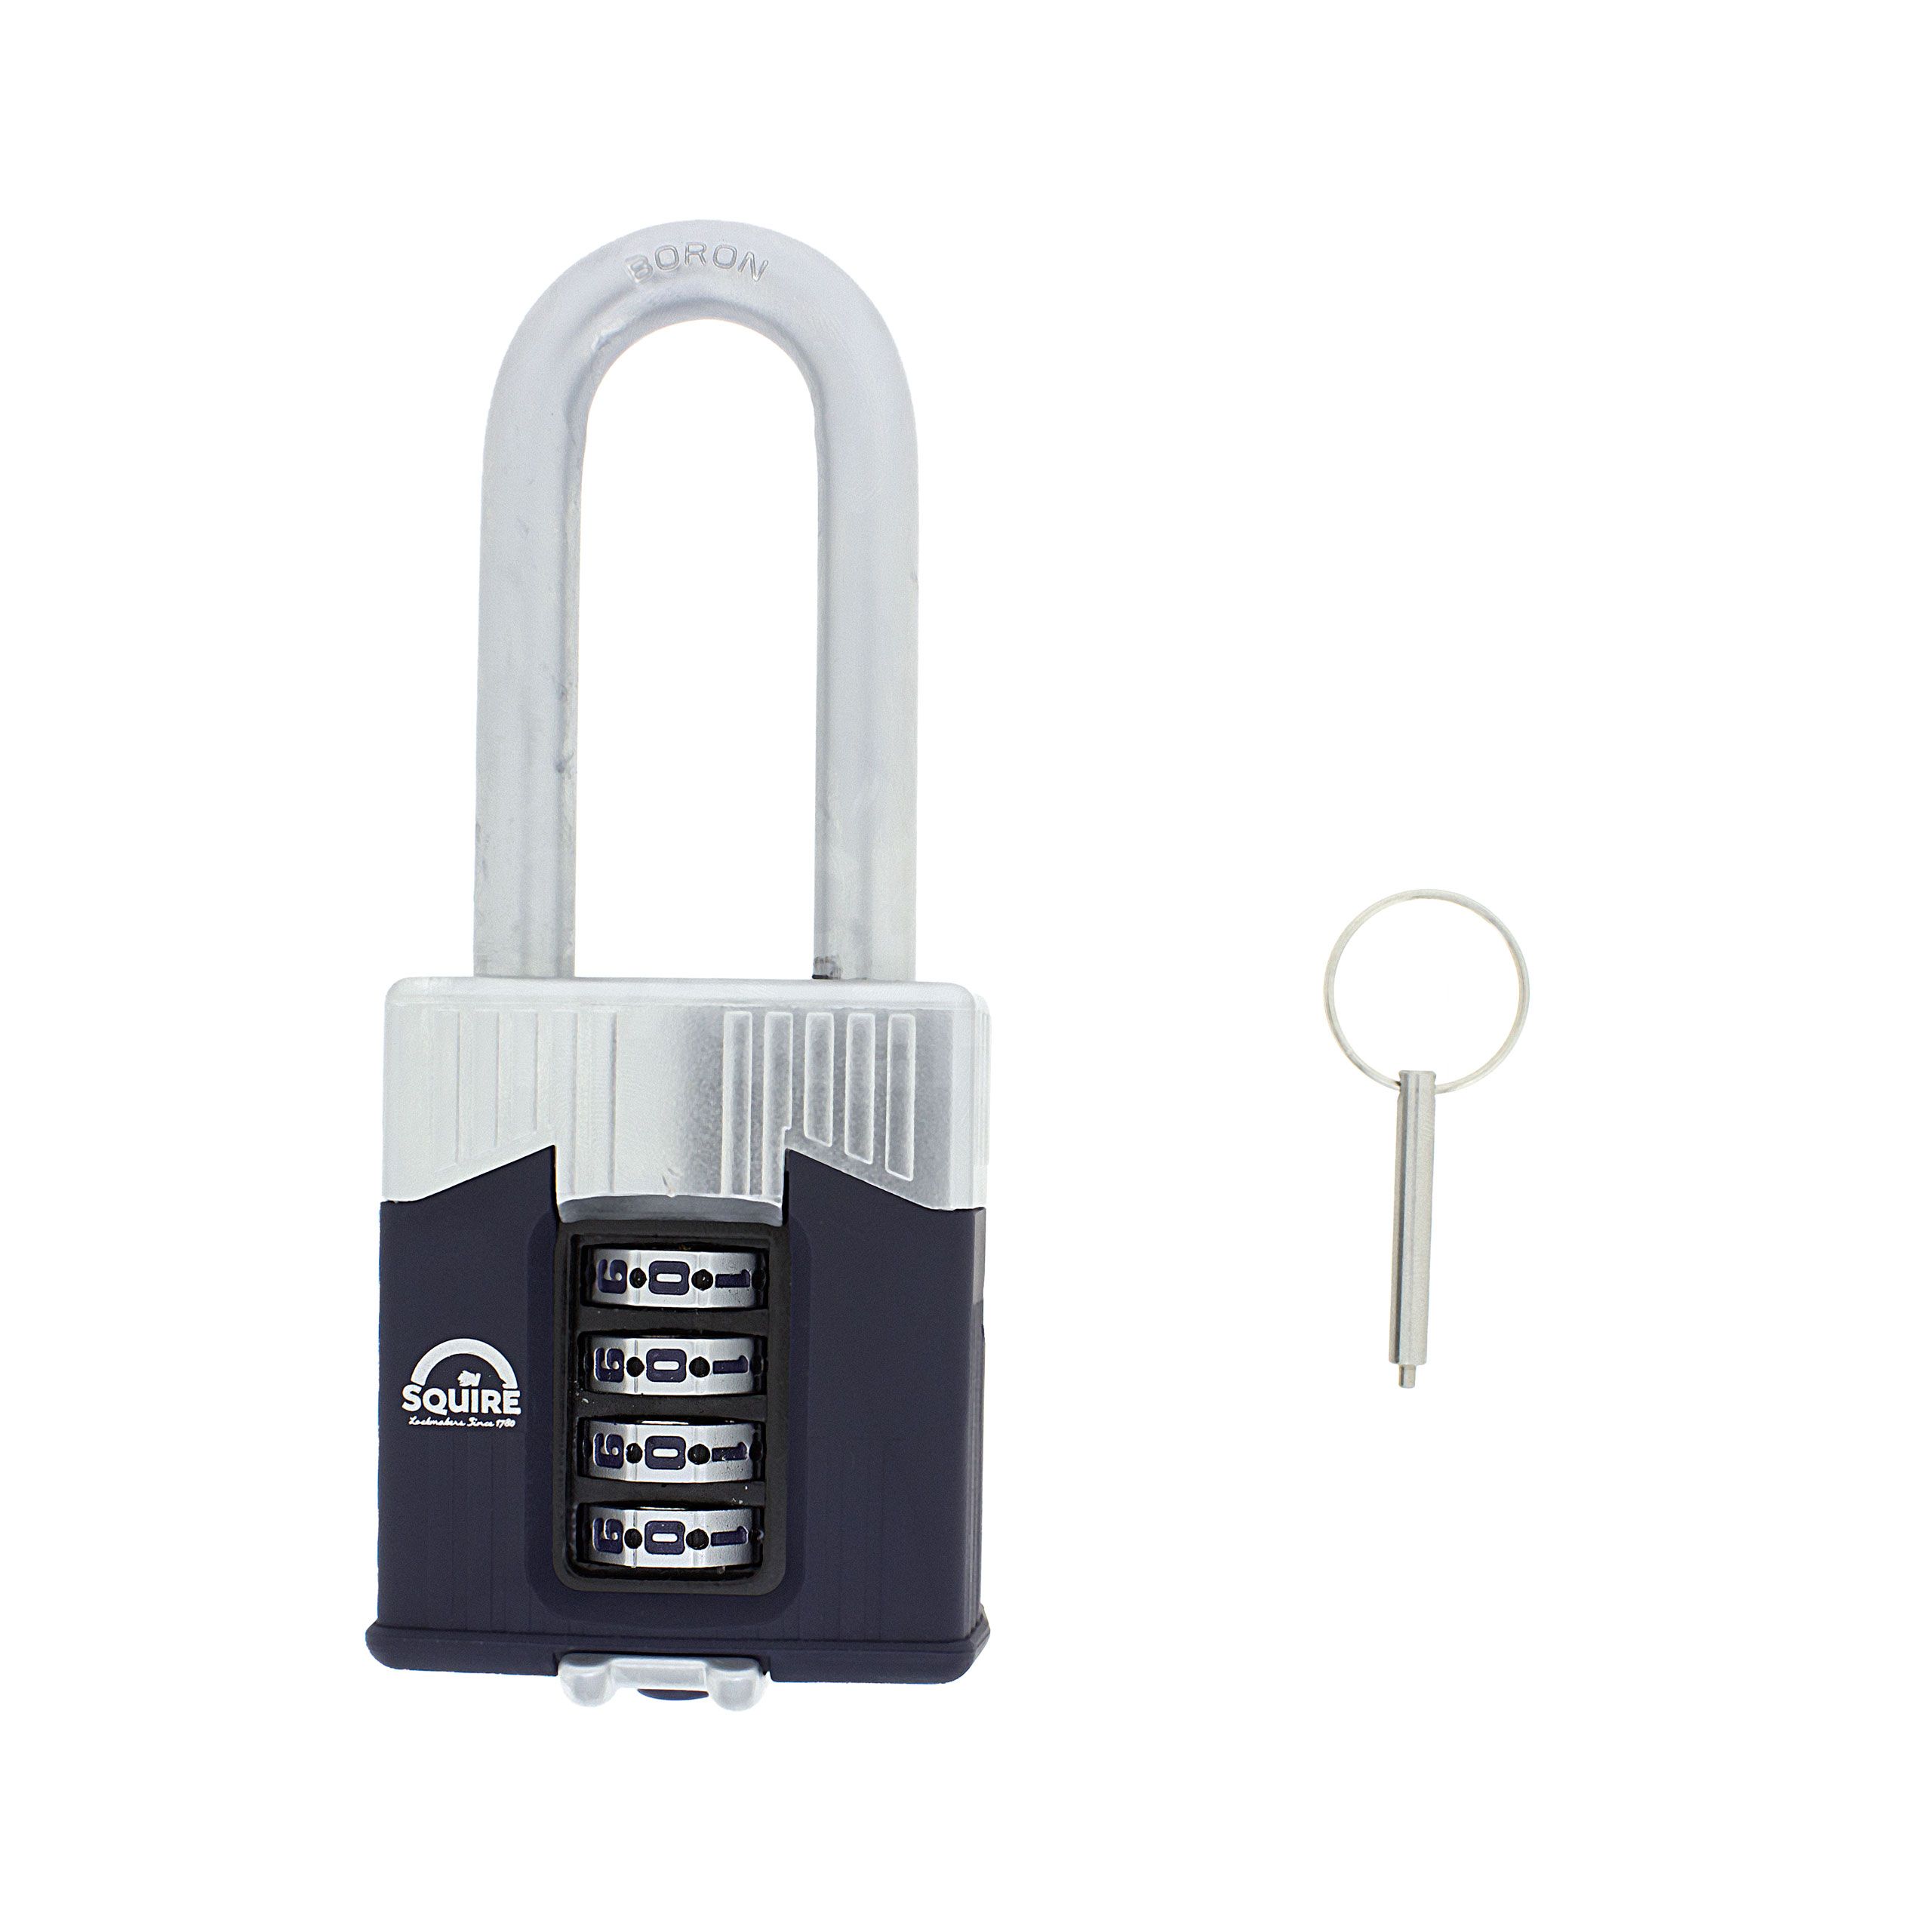 Dimensions Image: SQUIRE Warrior WAR55 - 63mm Long Shackle Combination Padlock